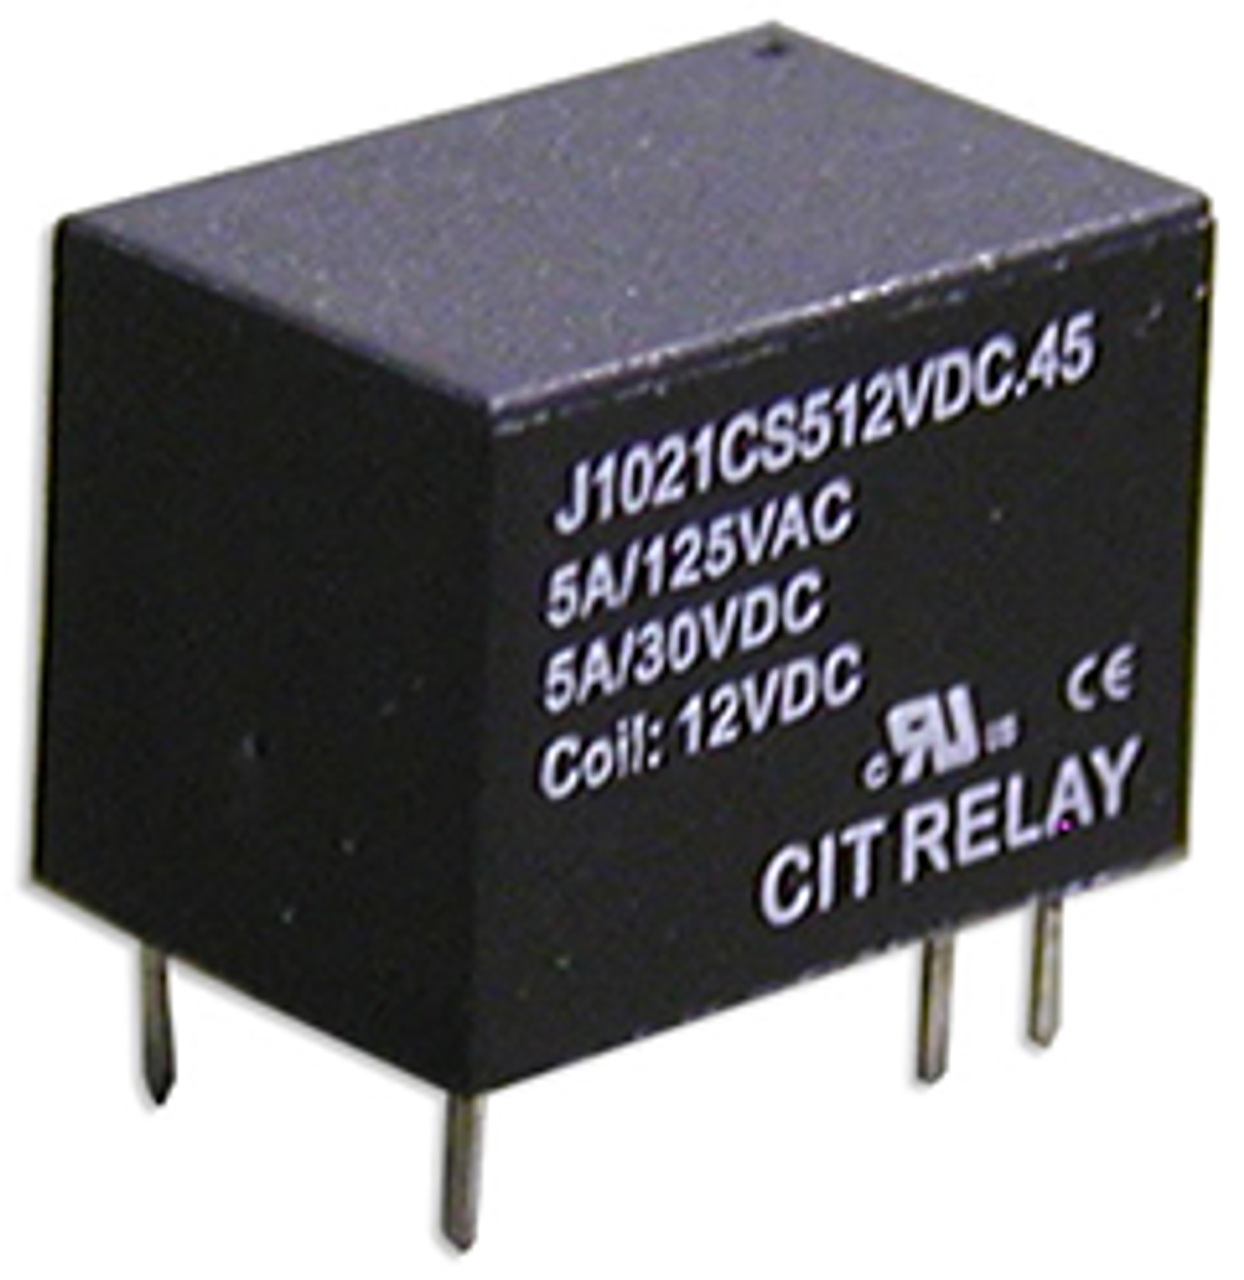 CIT Relay and Switch J1021AS3P6VDC.45 Power Relays